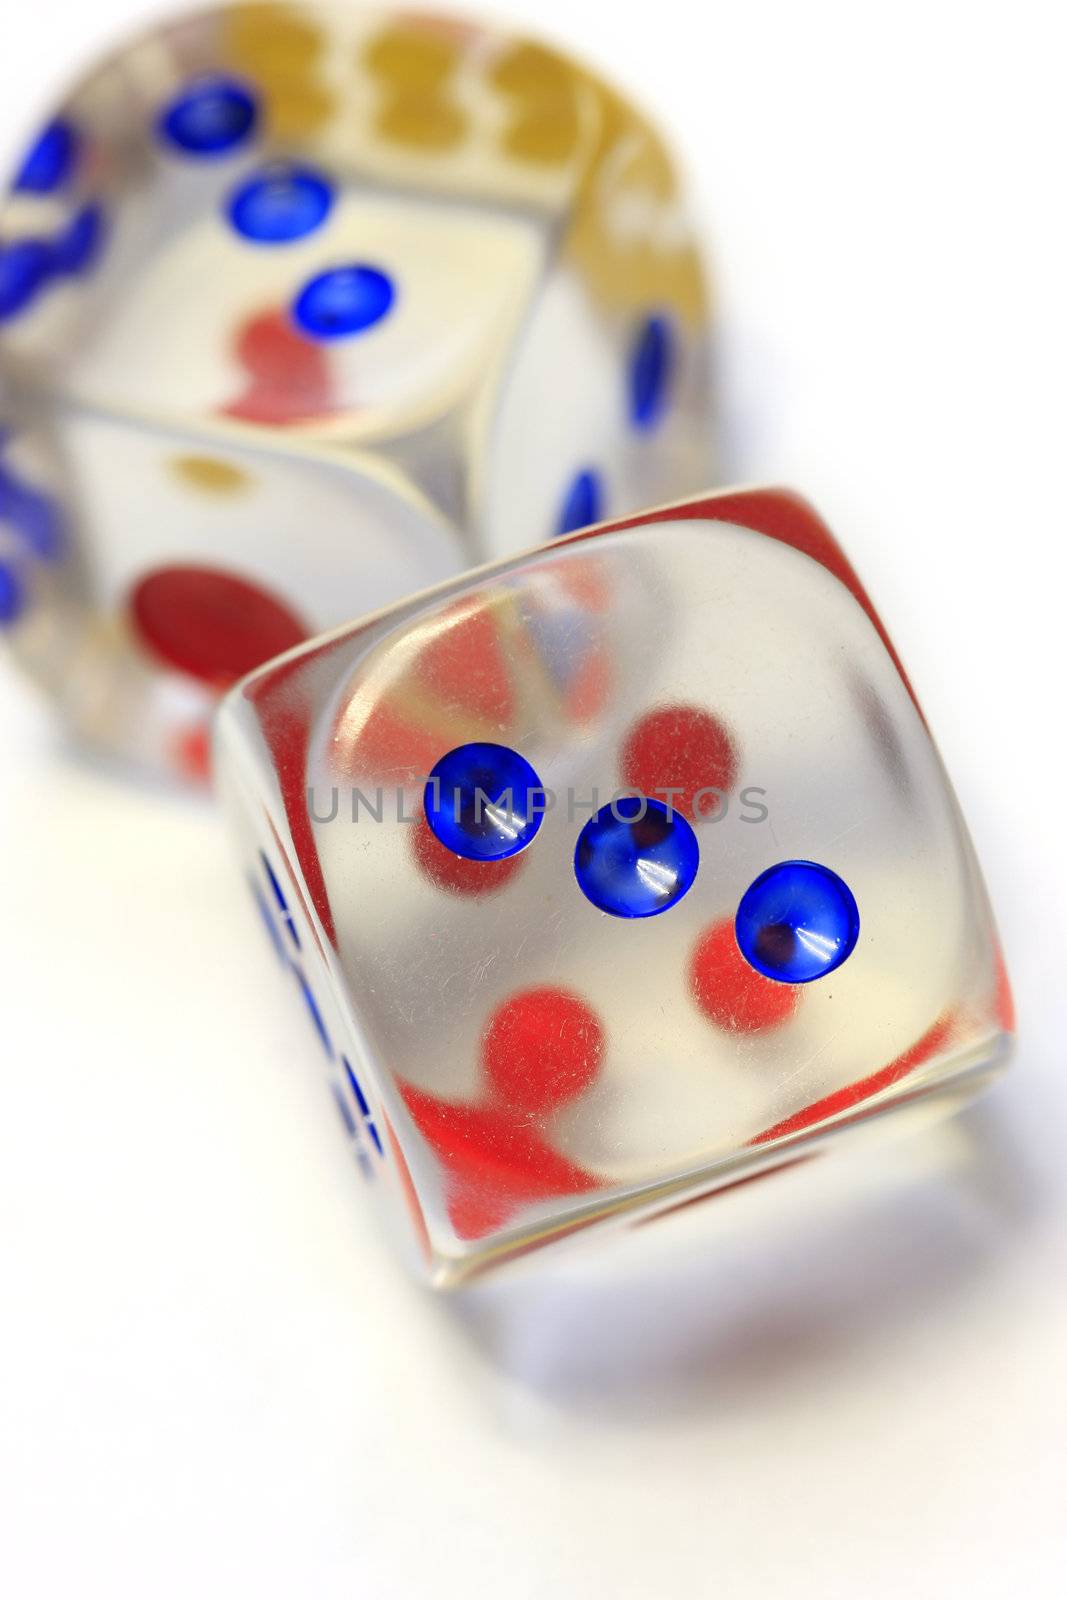 Roll The Dice, Throw The Dice by sacatani